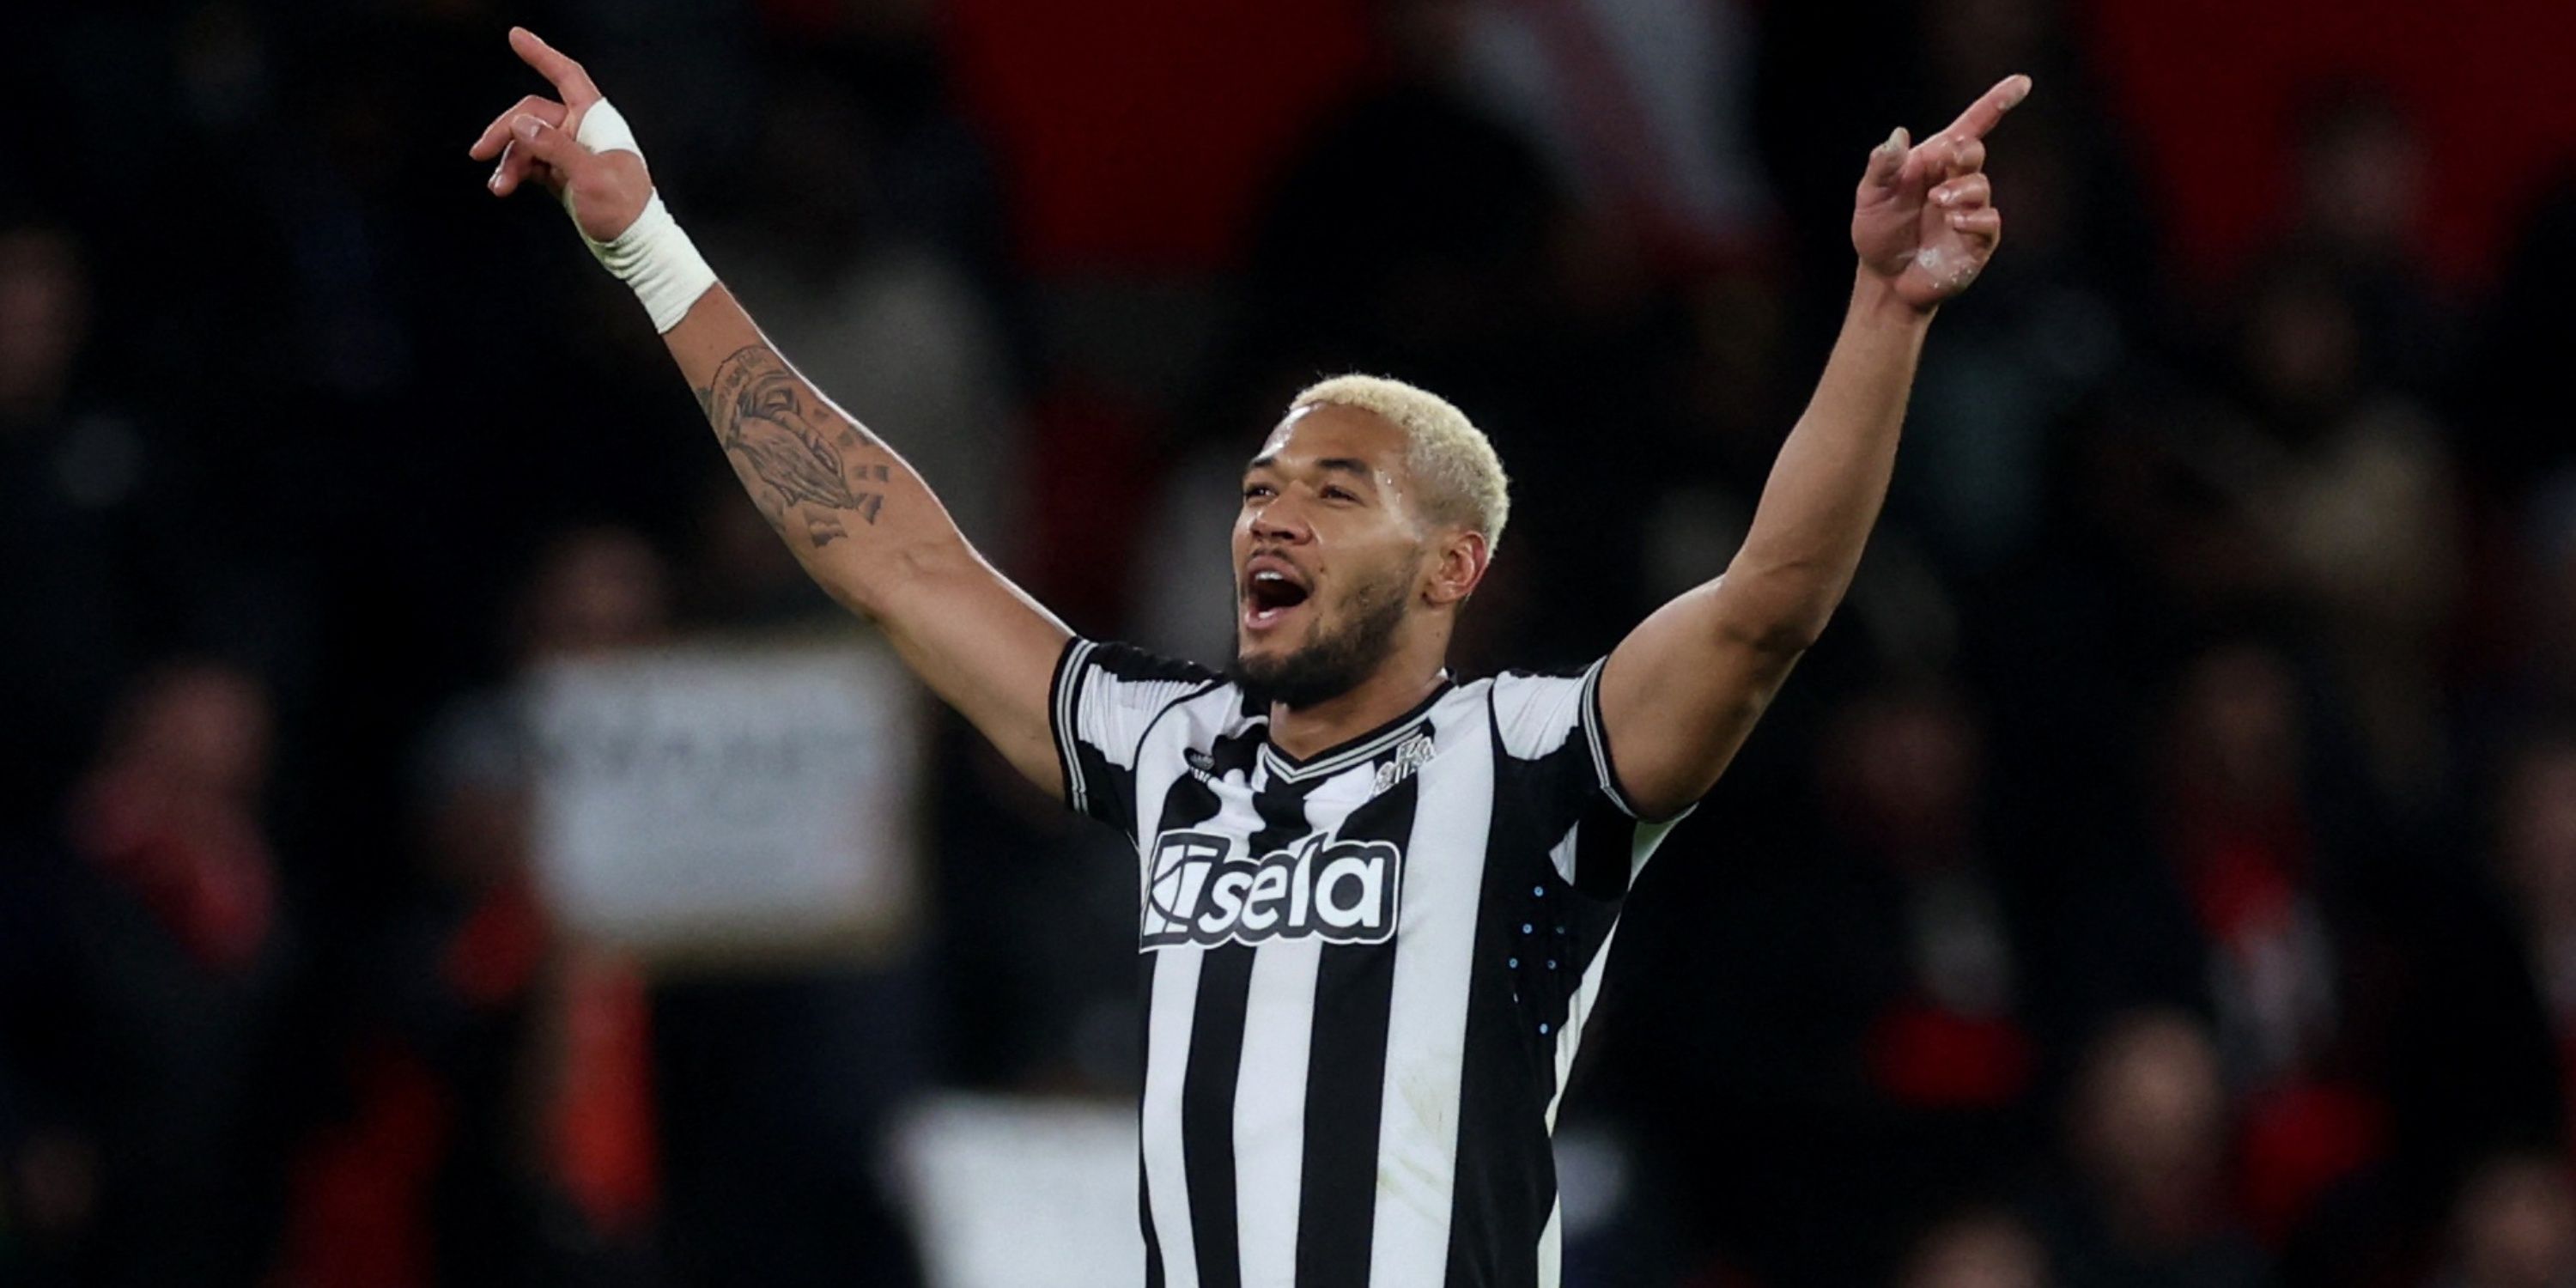 newcastle could sign a bigger talent than joelinton for £34m